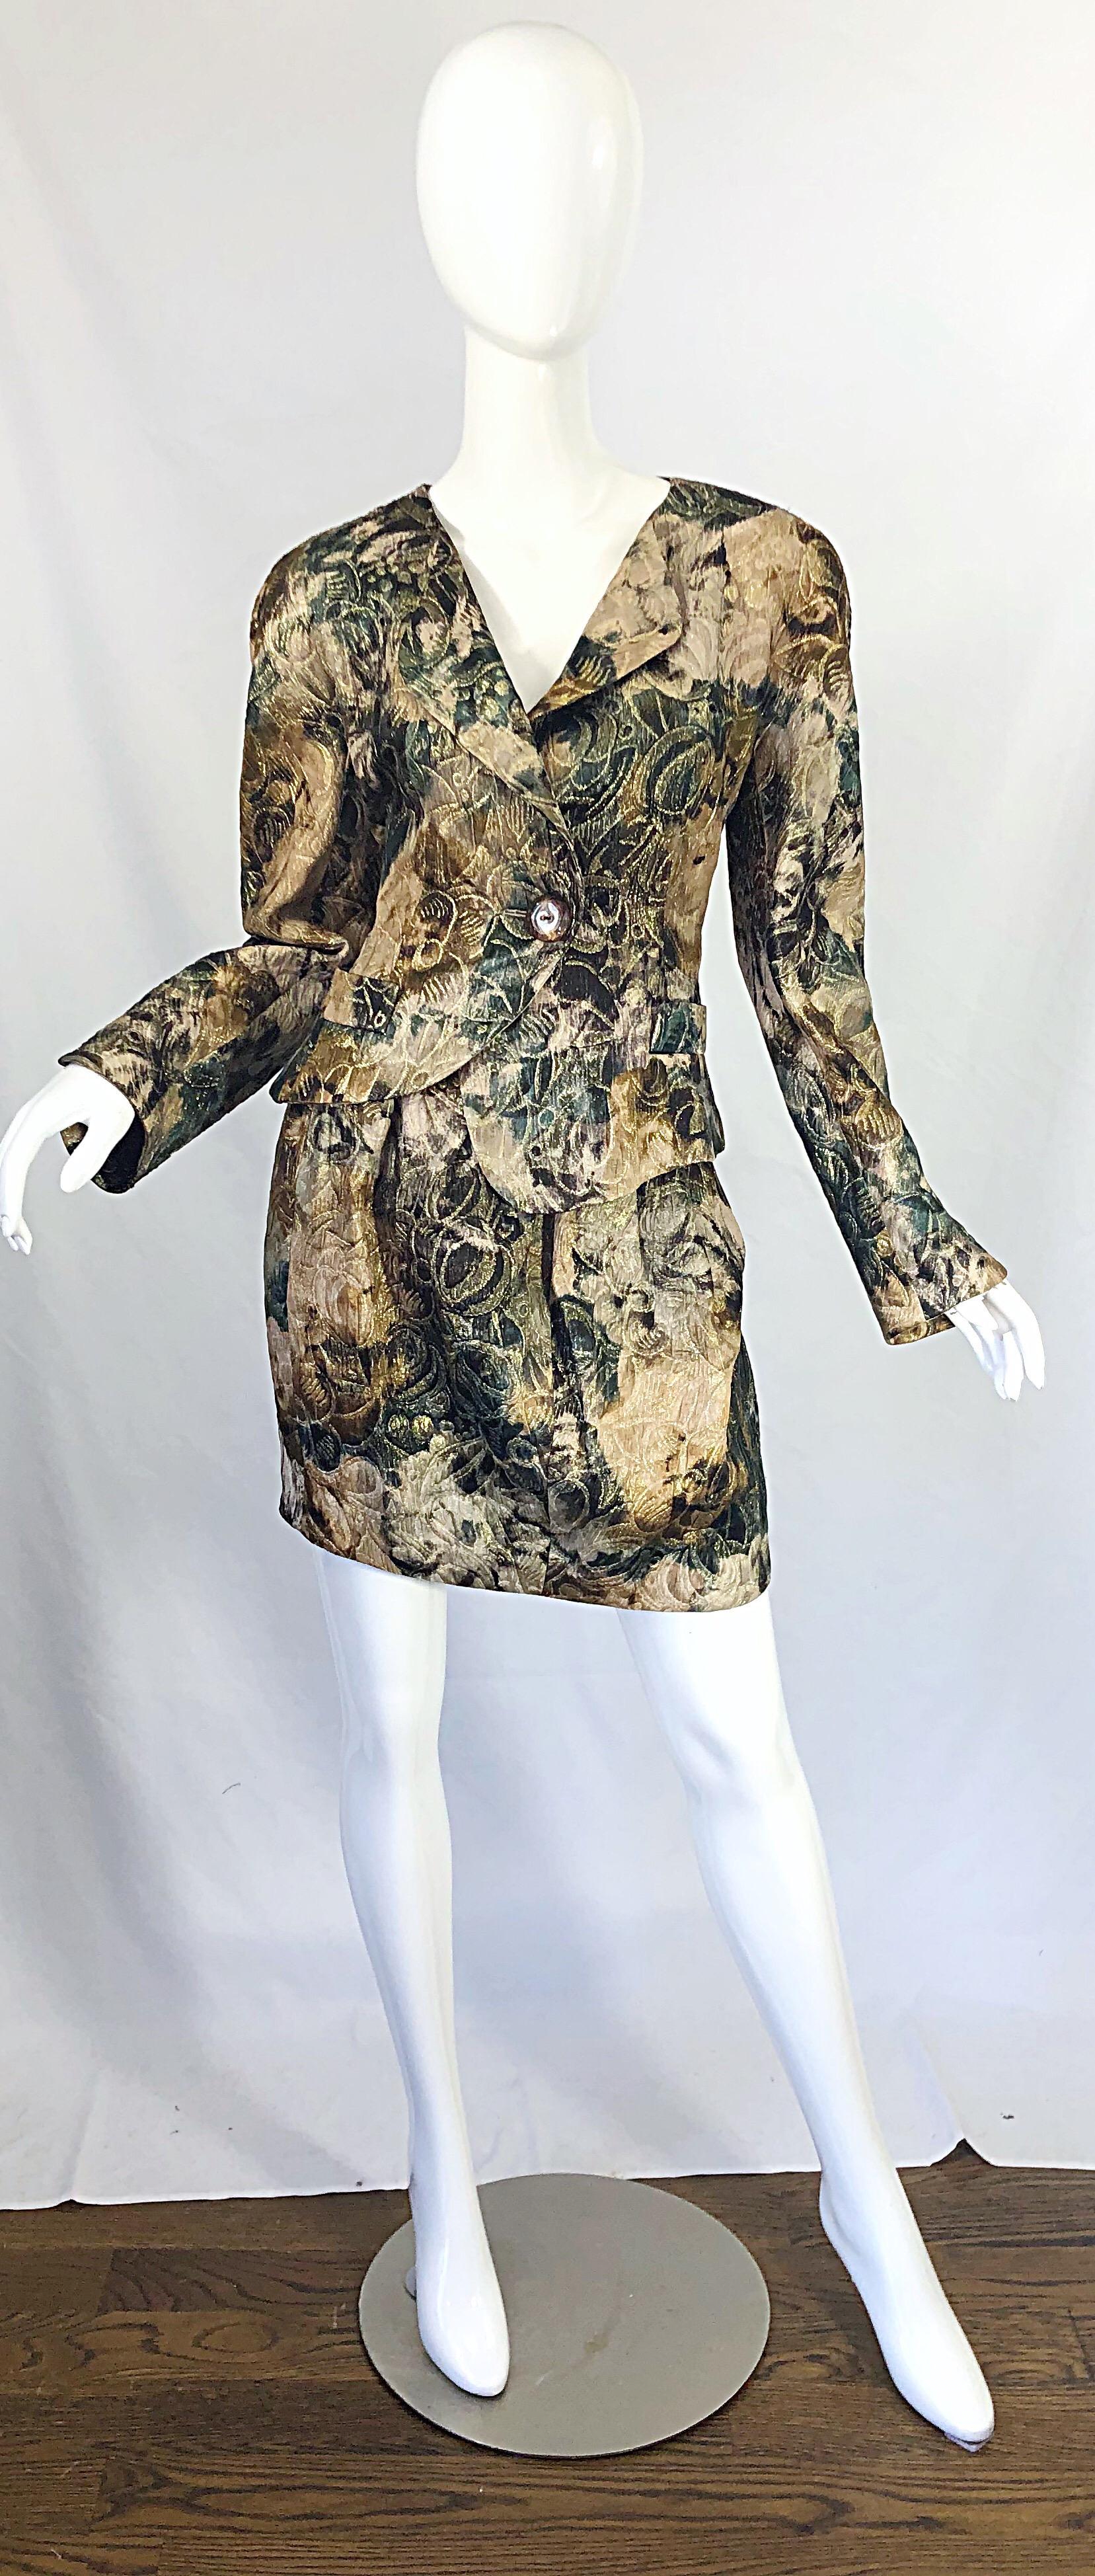 Avant Garde early 90s KRIZIA asymmetrical silk skirt suit ! Features warm hues of hunter green, brown, tan and ivory throughout. Asymmetrical hem on the jacket and each collar. Single button closure with snap. High waisted mini skirt has hidden